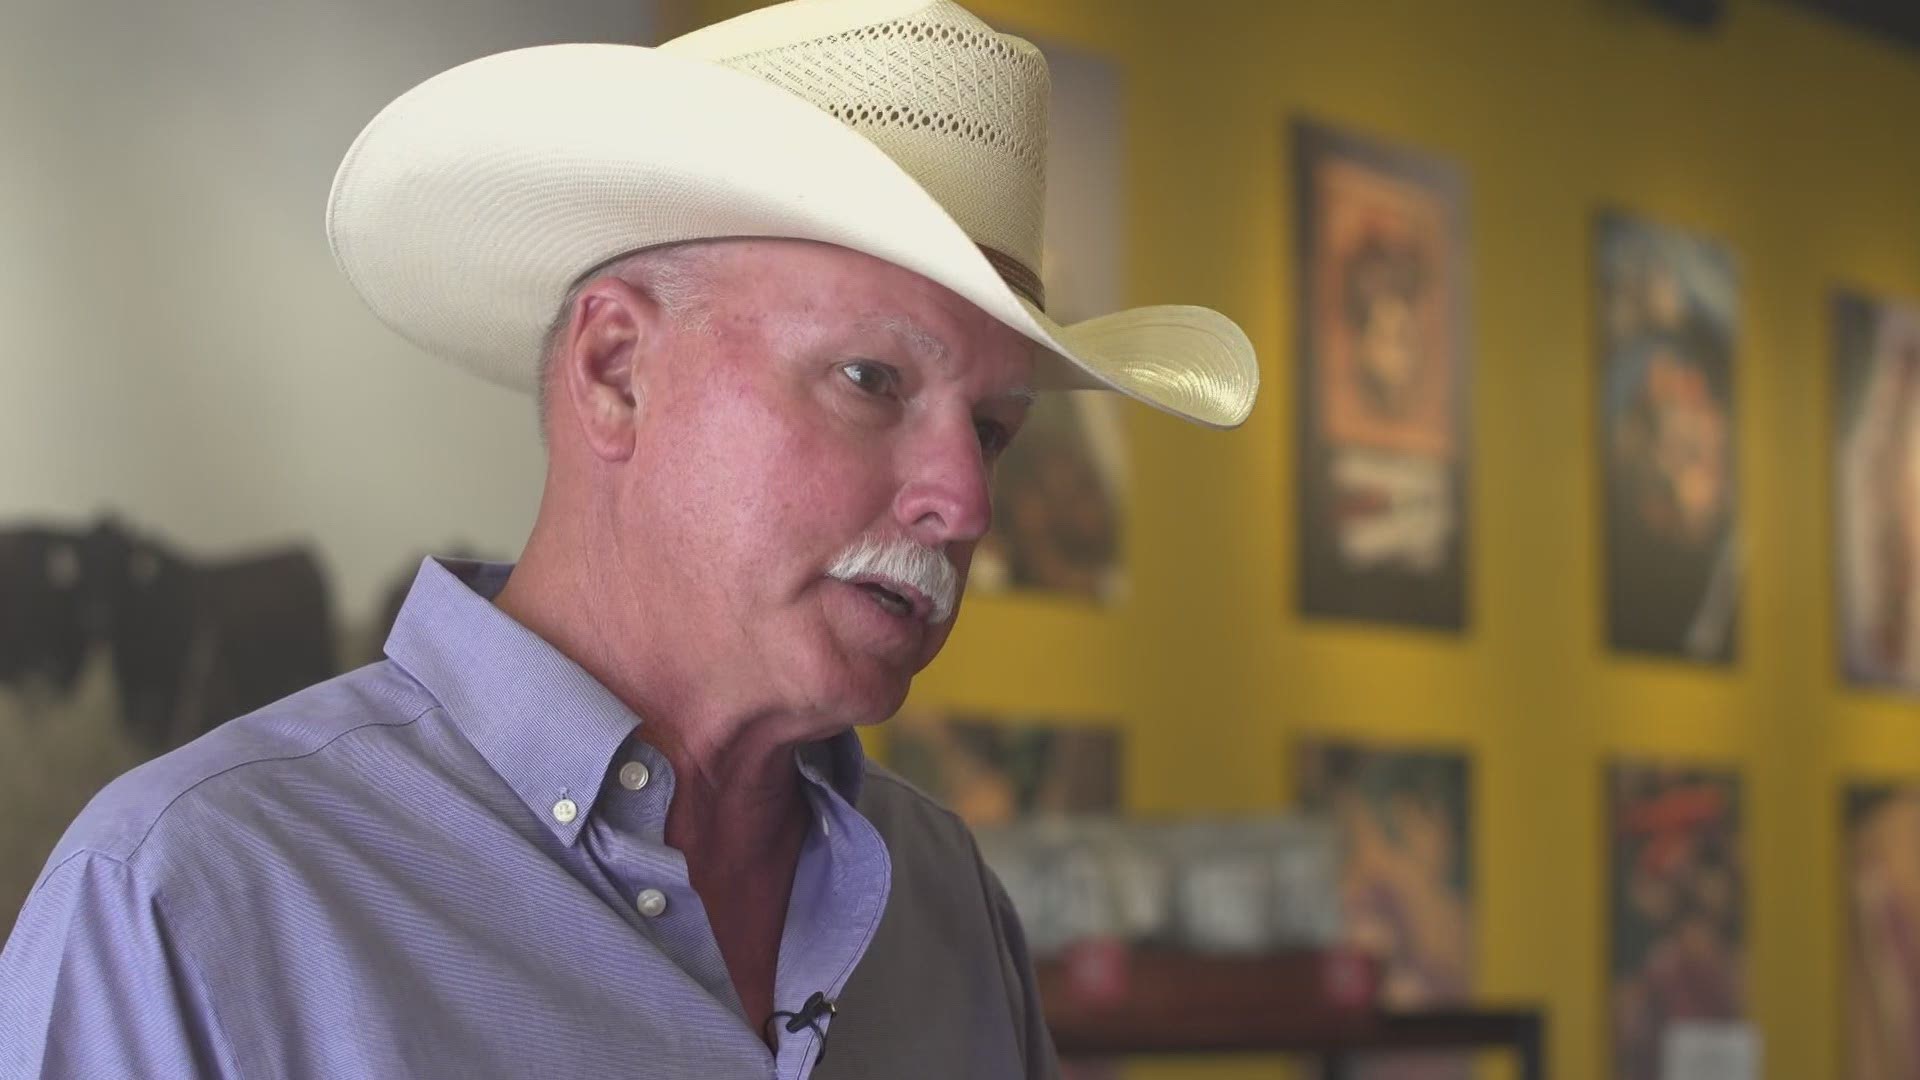 Taggart is a rancher in Grandview, who raises and sells premium, grass fed beef through his own stores.